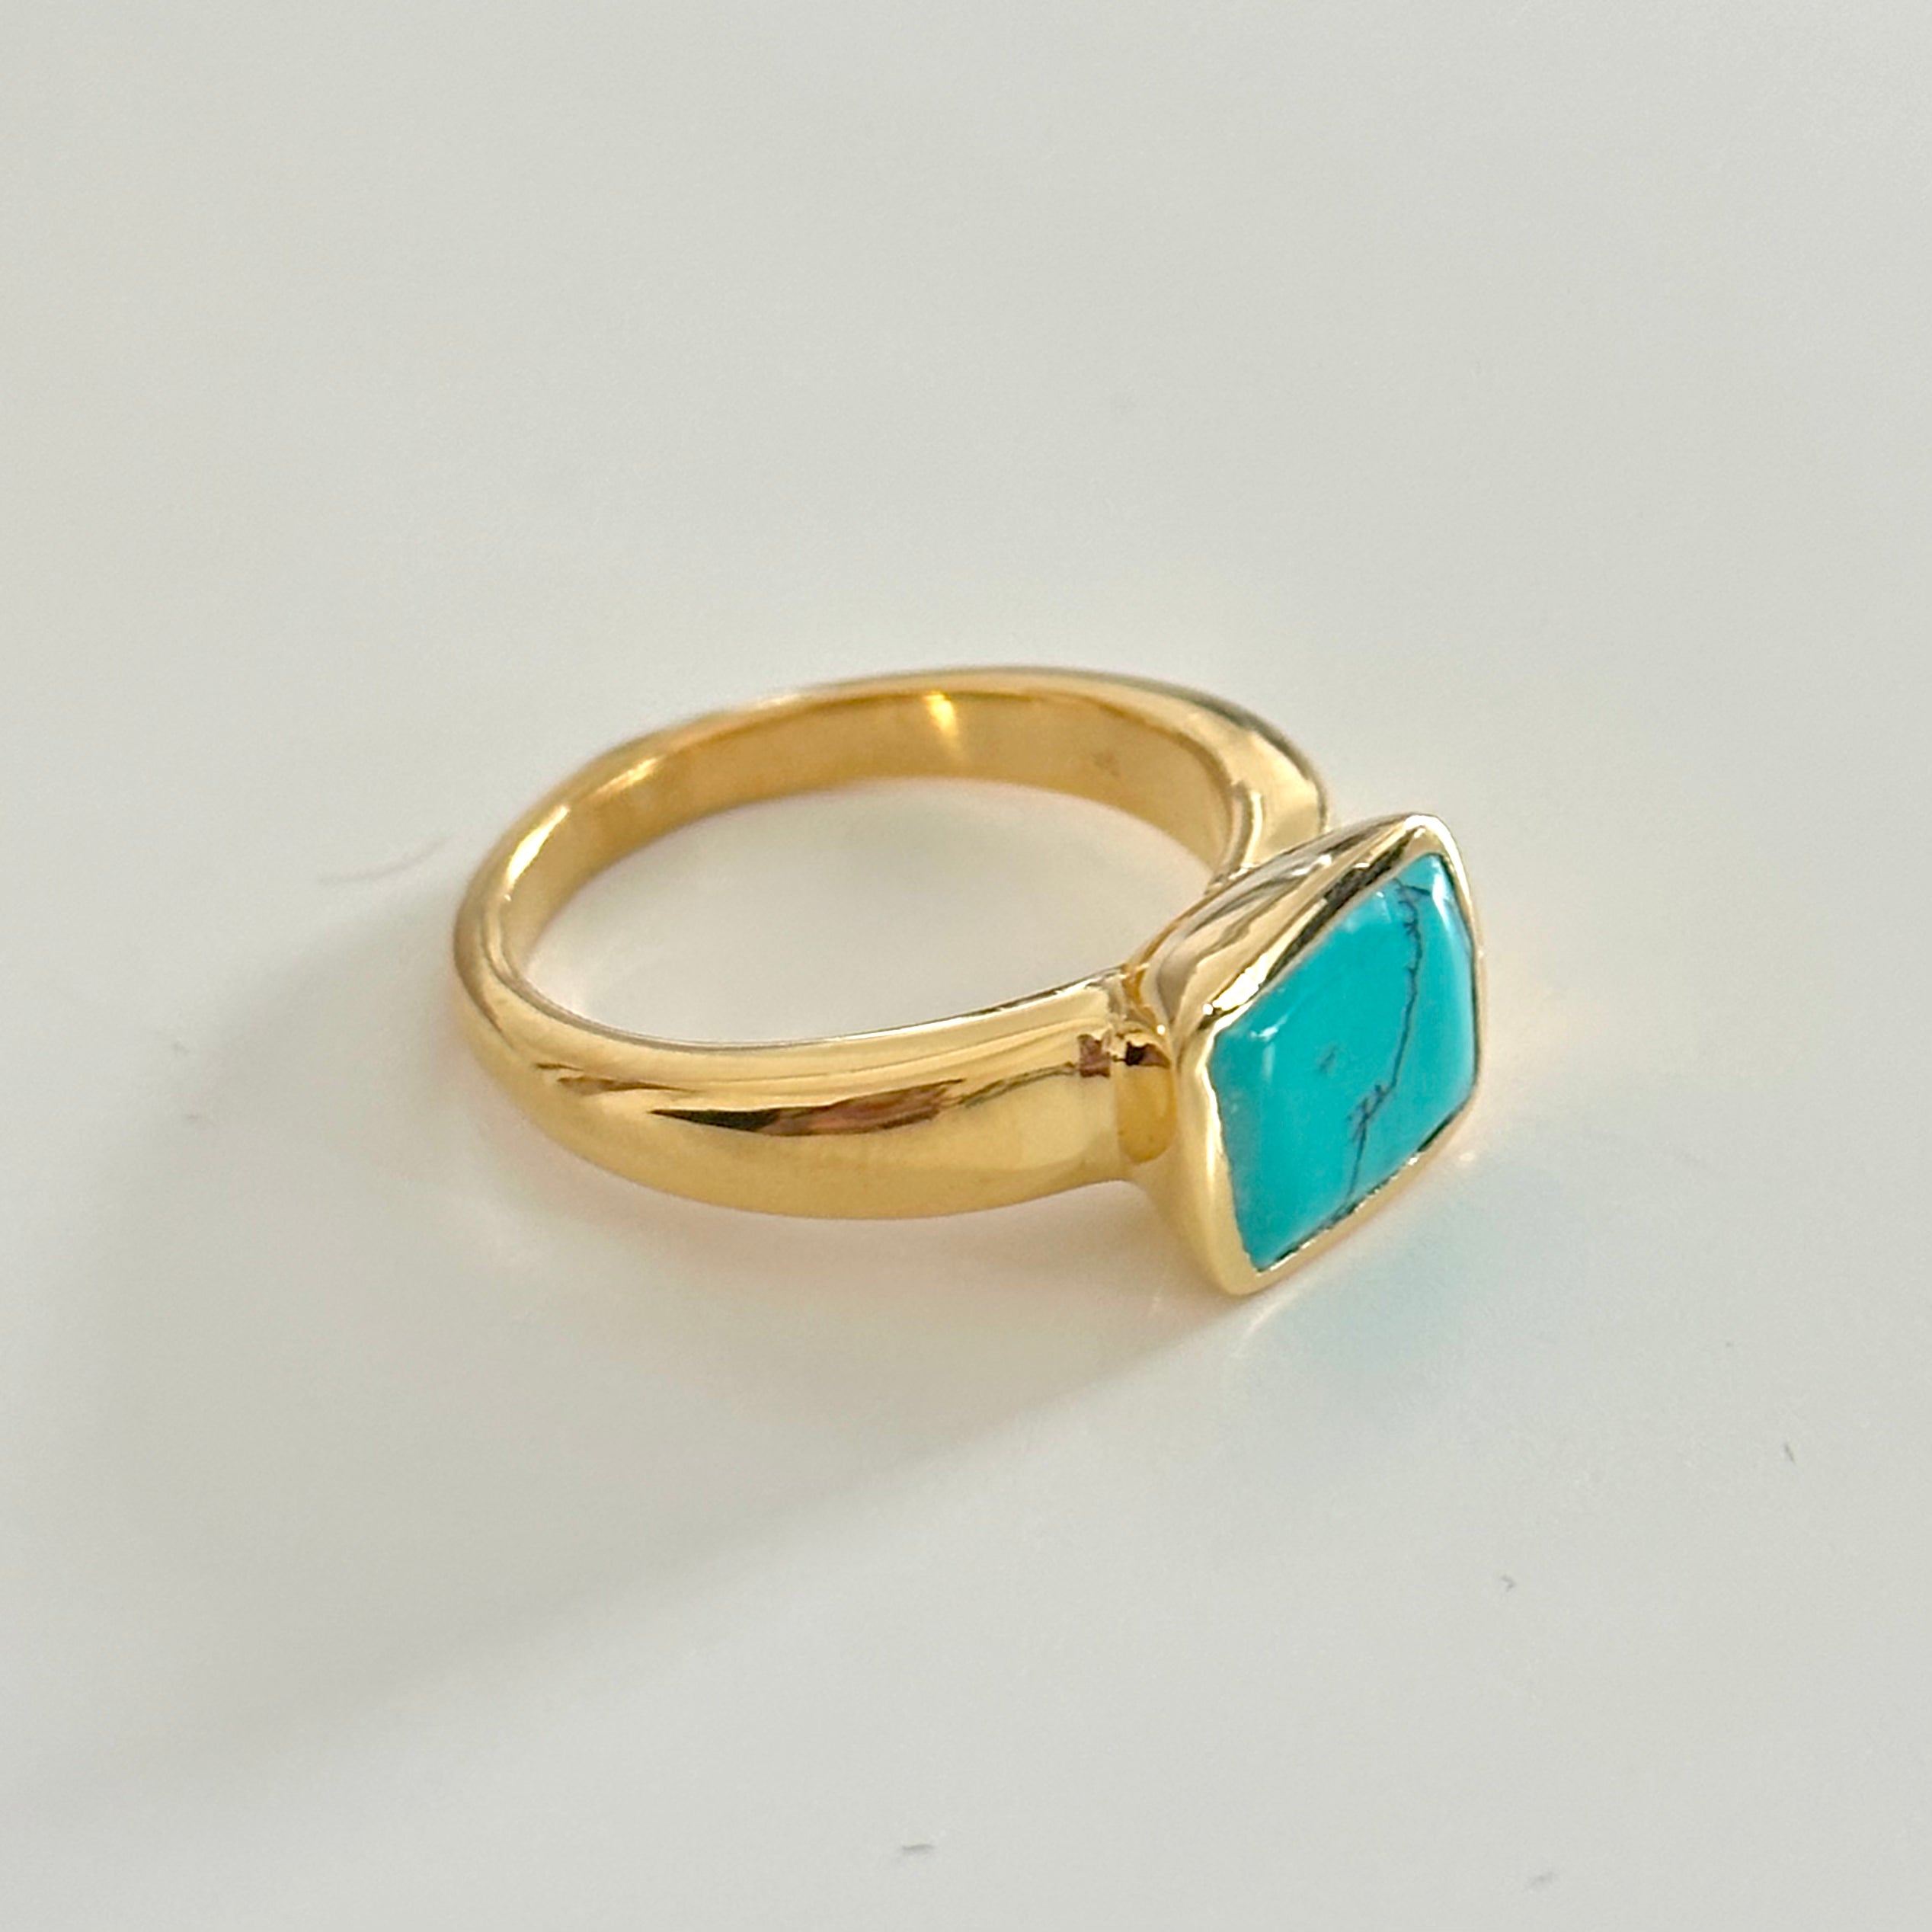 Faceted Rectangular Cut Natural Gemstone Gold Plated Sterling Silver Ring - Turquoise